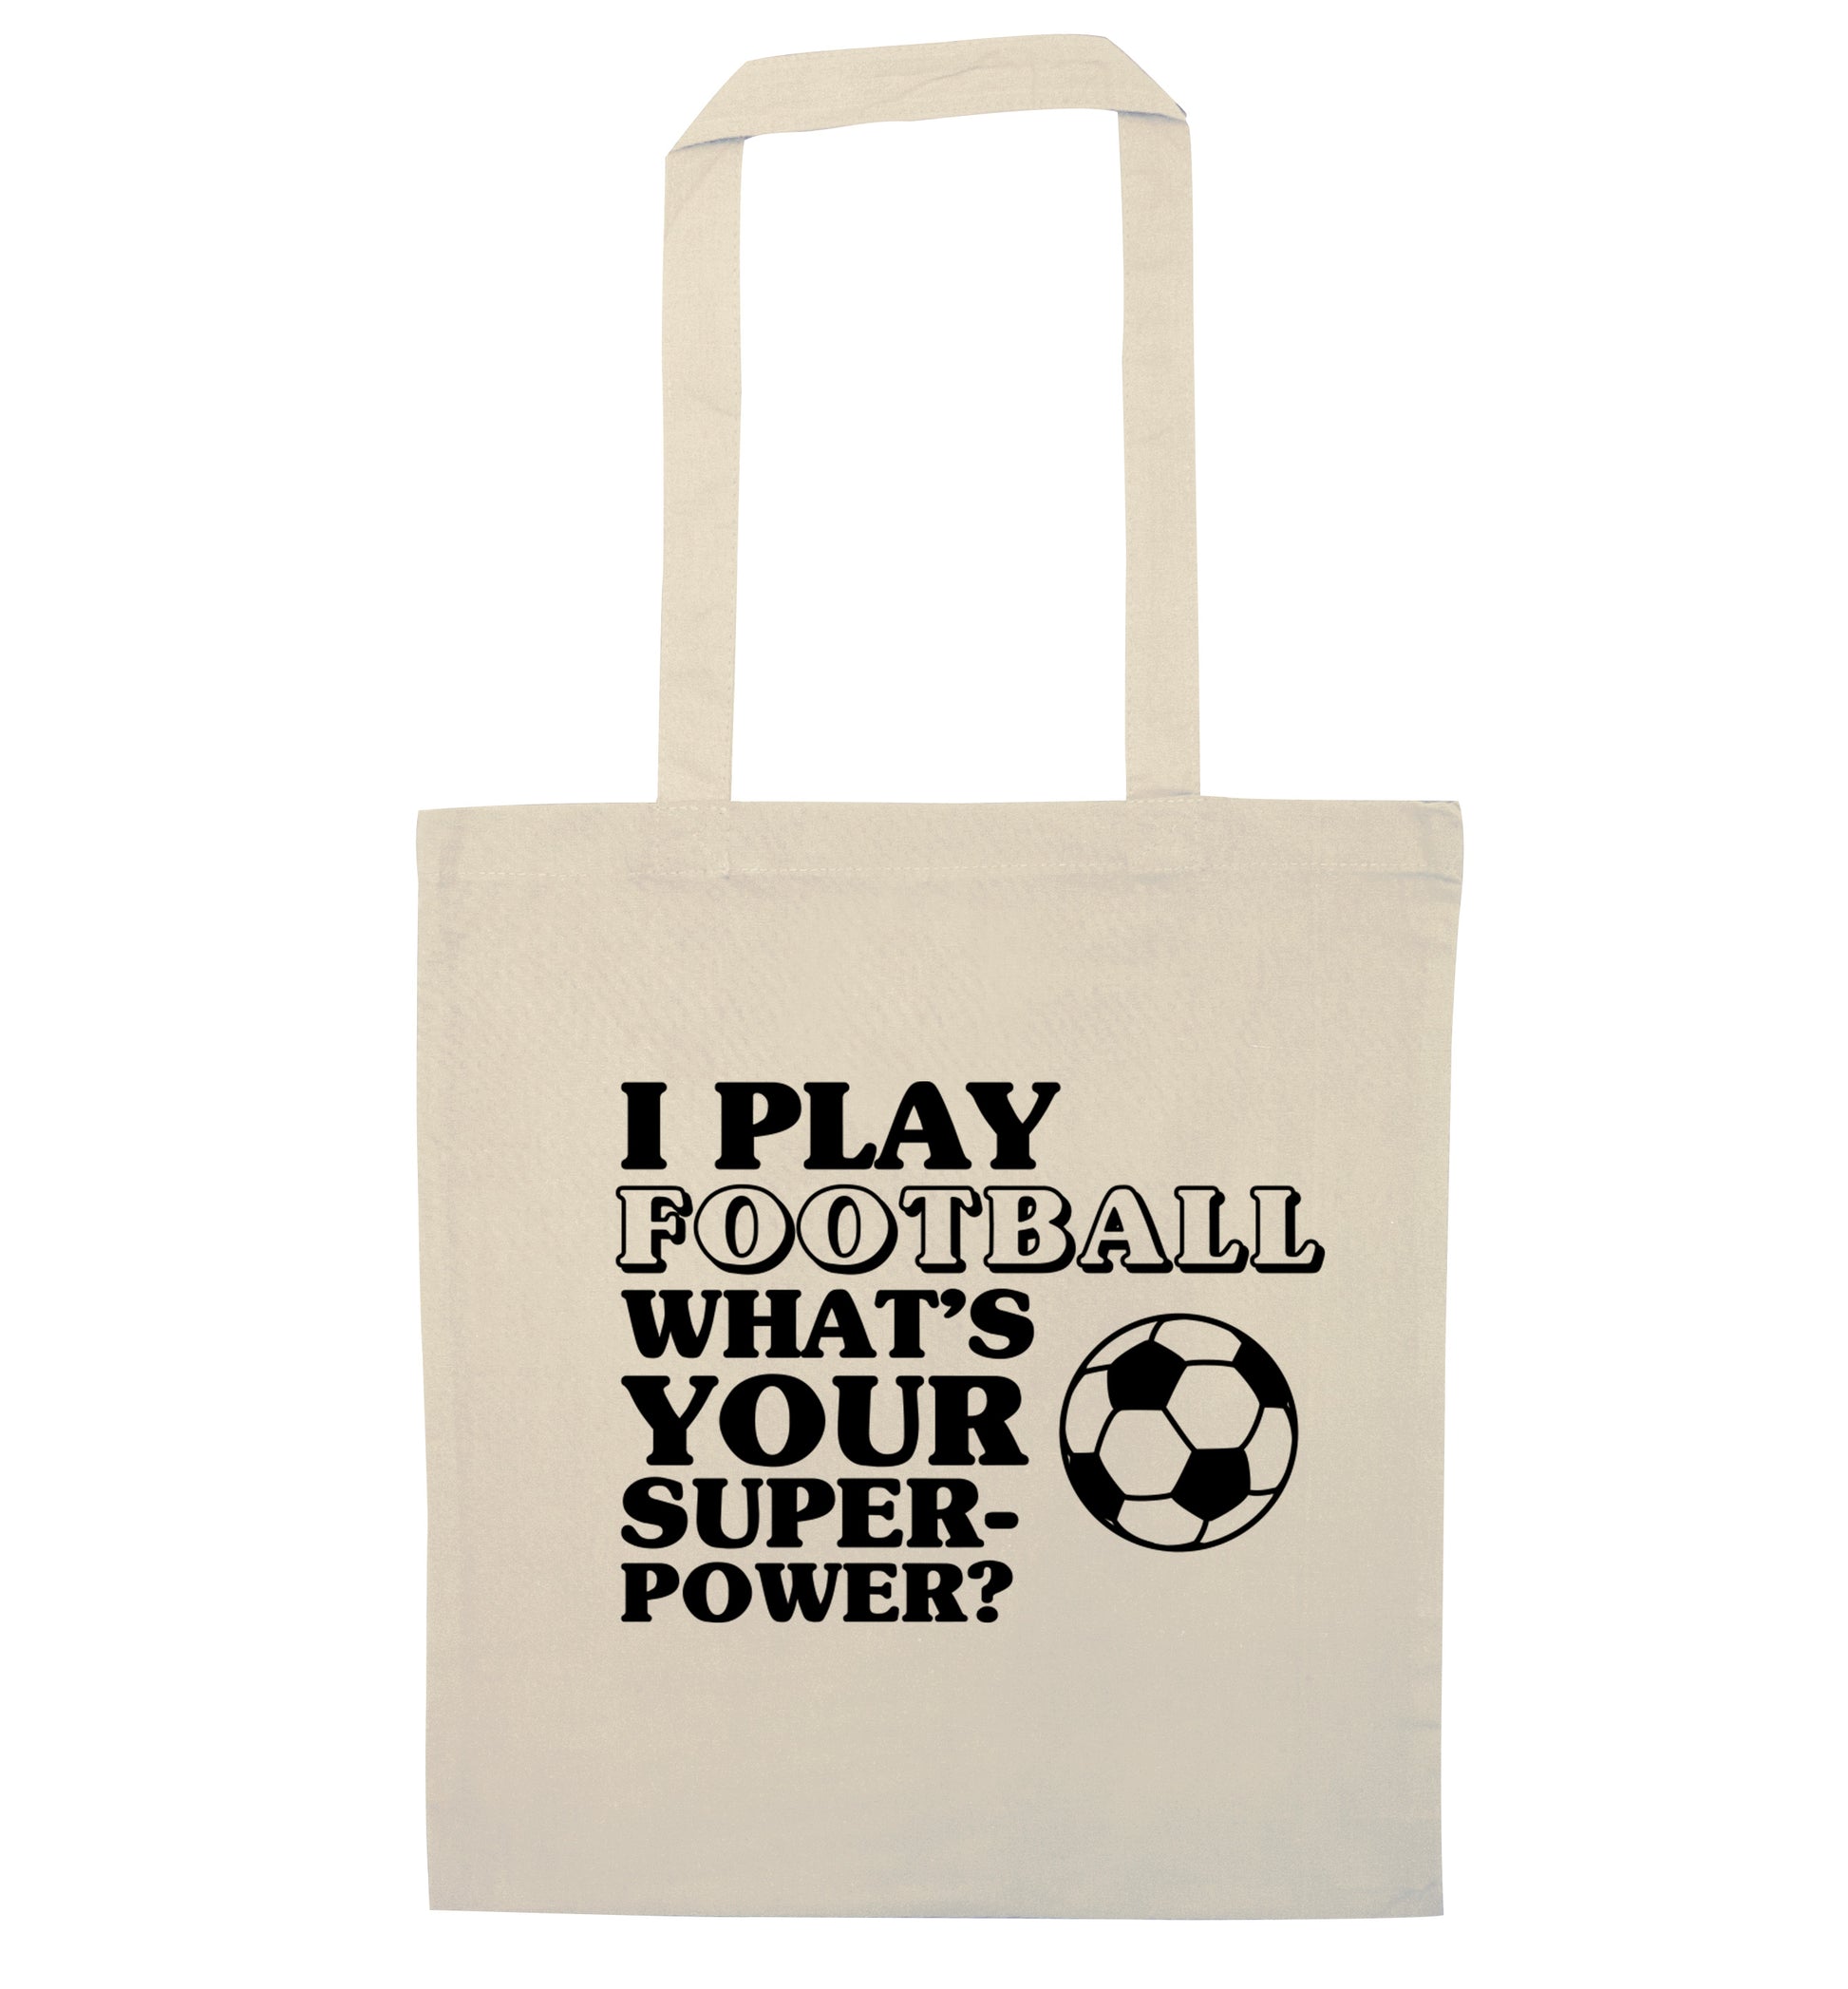 I play football what's your superpower? natural tote bag